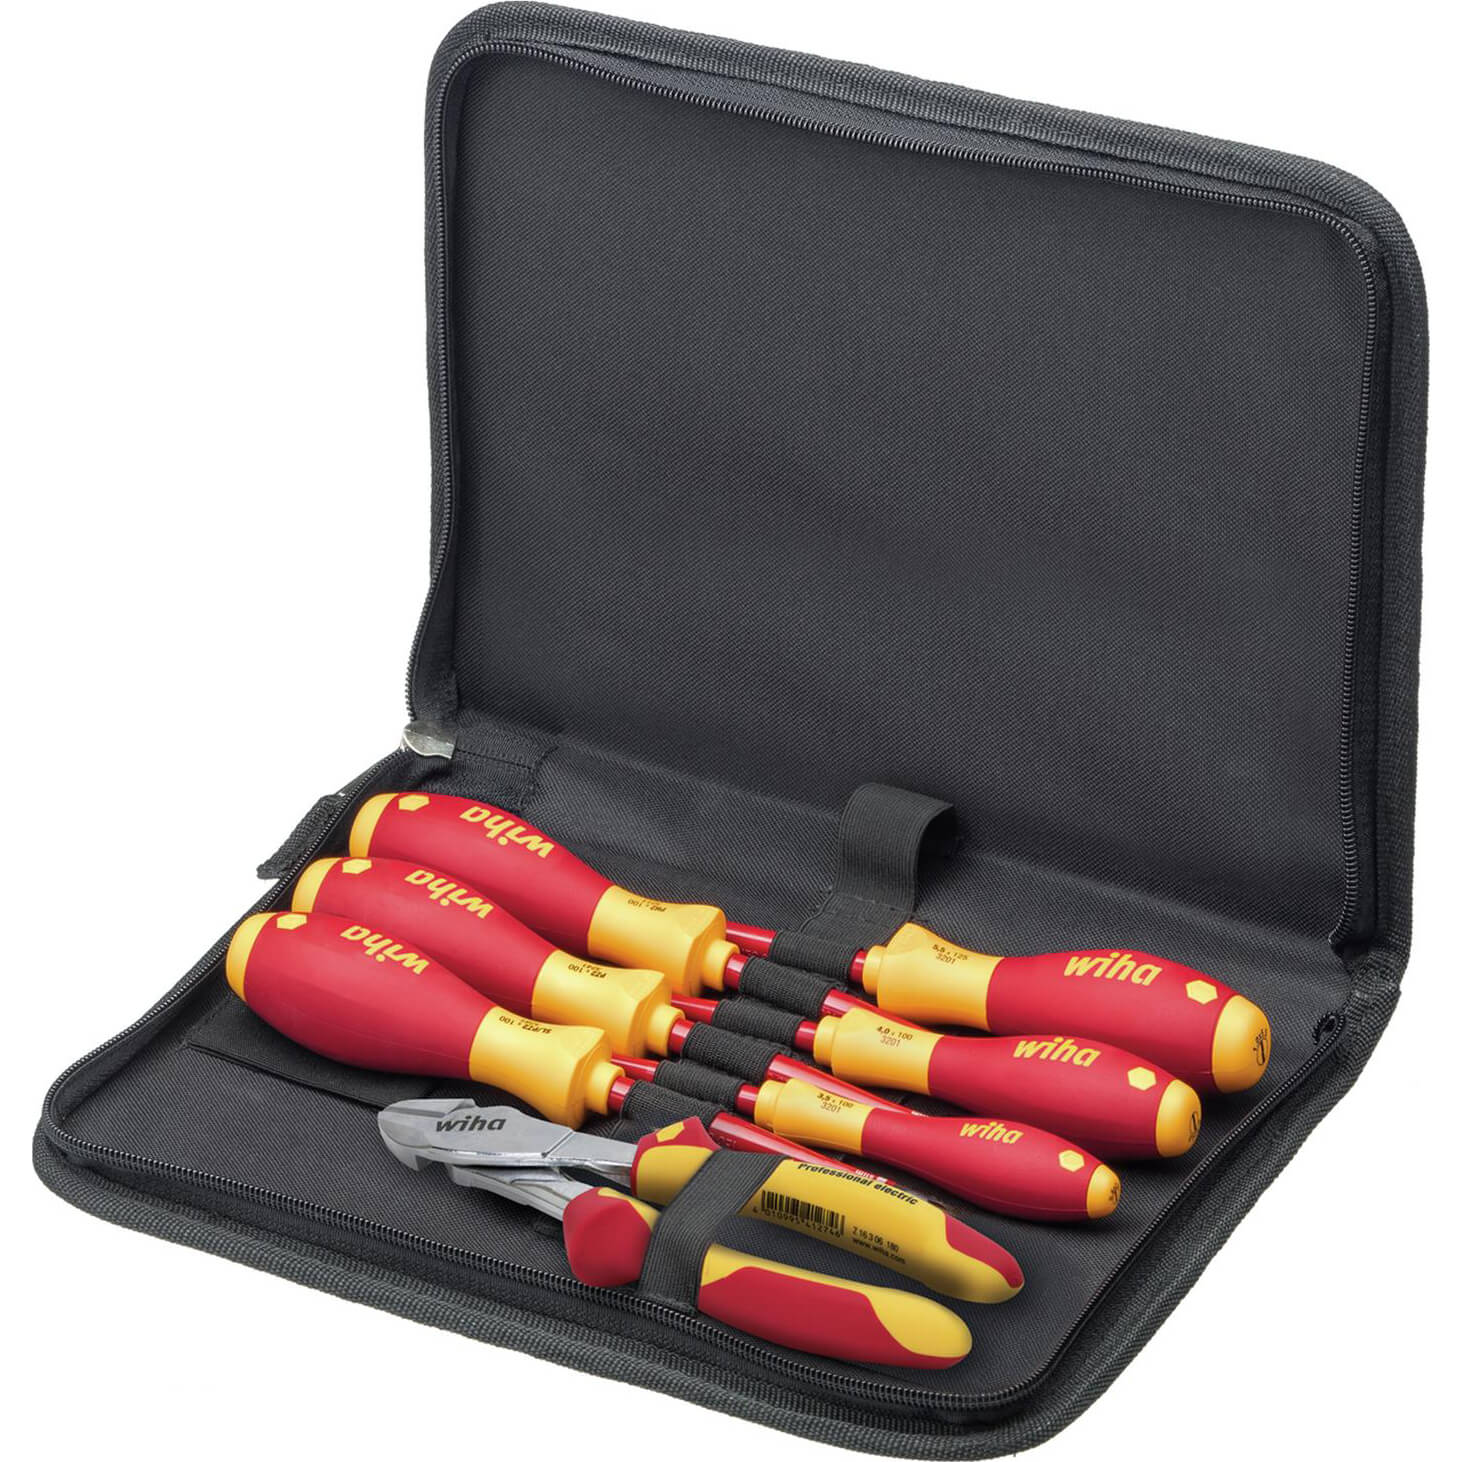 Photos - Other Hand Tools Wiha 7 piece VDE Insulated Screwdriver and Side Cutters Tool Kit 38020 